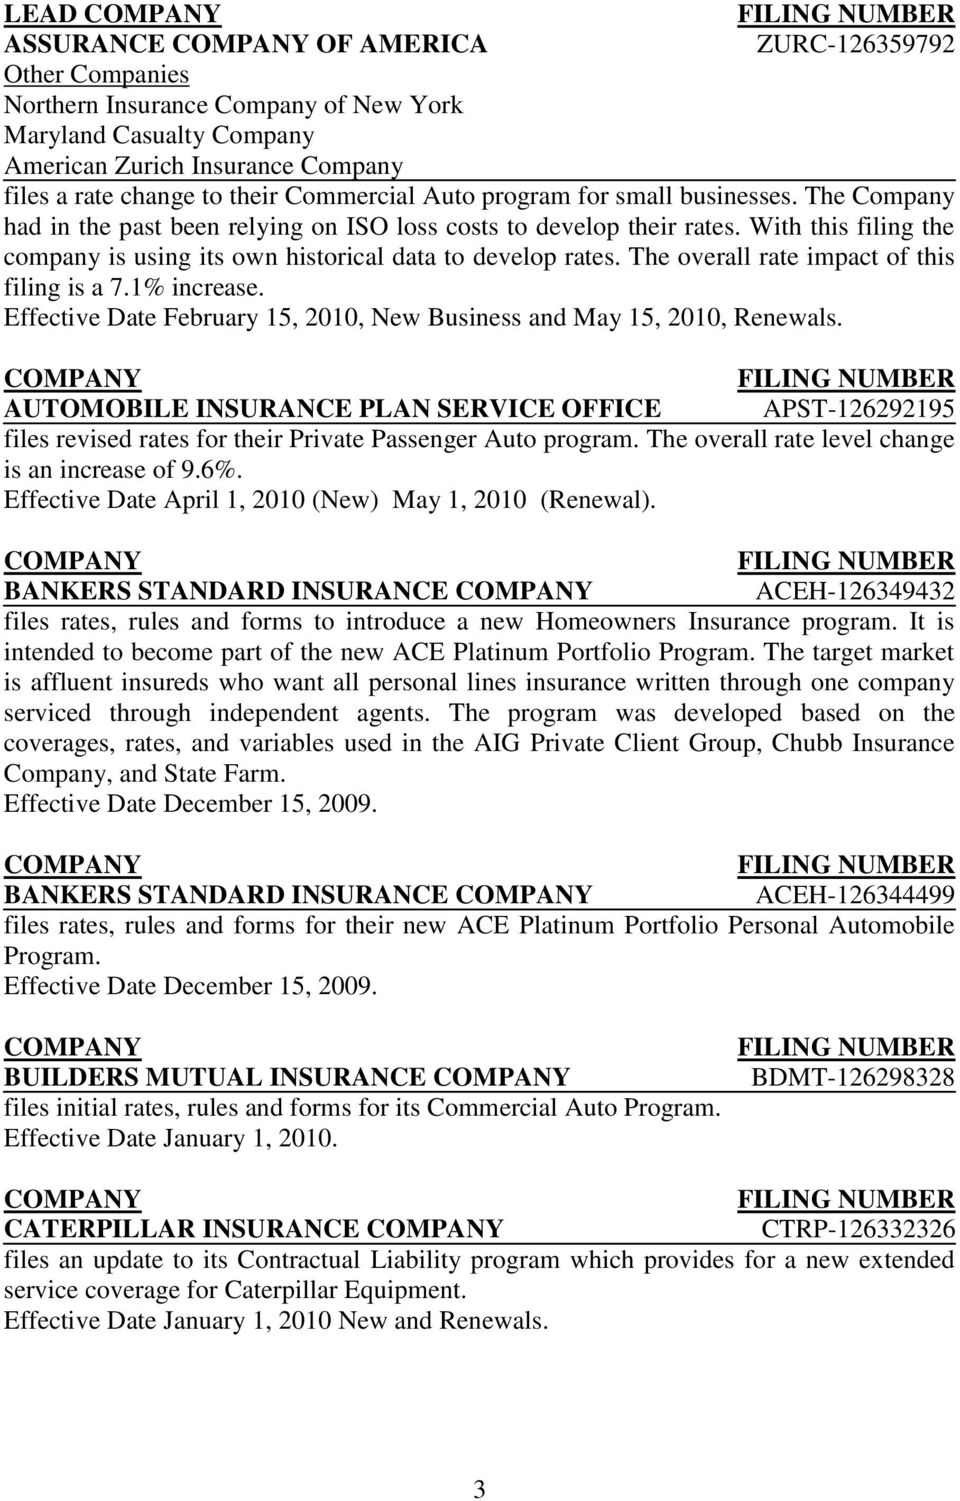 The overall rate impact of this filing is a 7.1% increase. Effective Date February 15, 2010, New Business and May 15, 2010, Renewals.